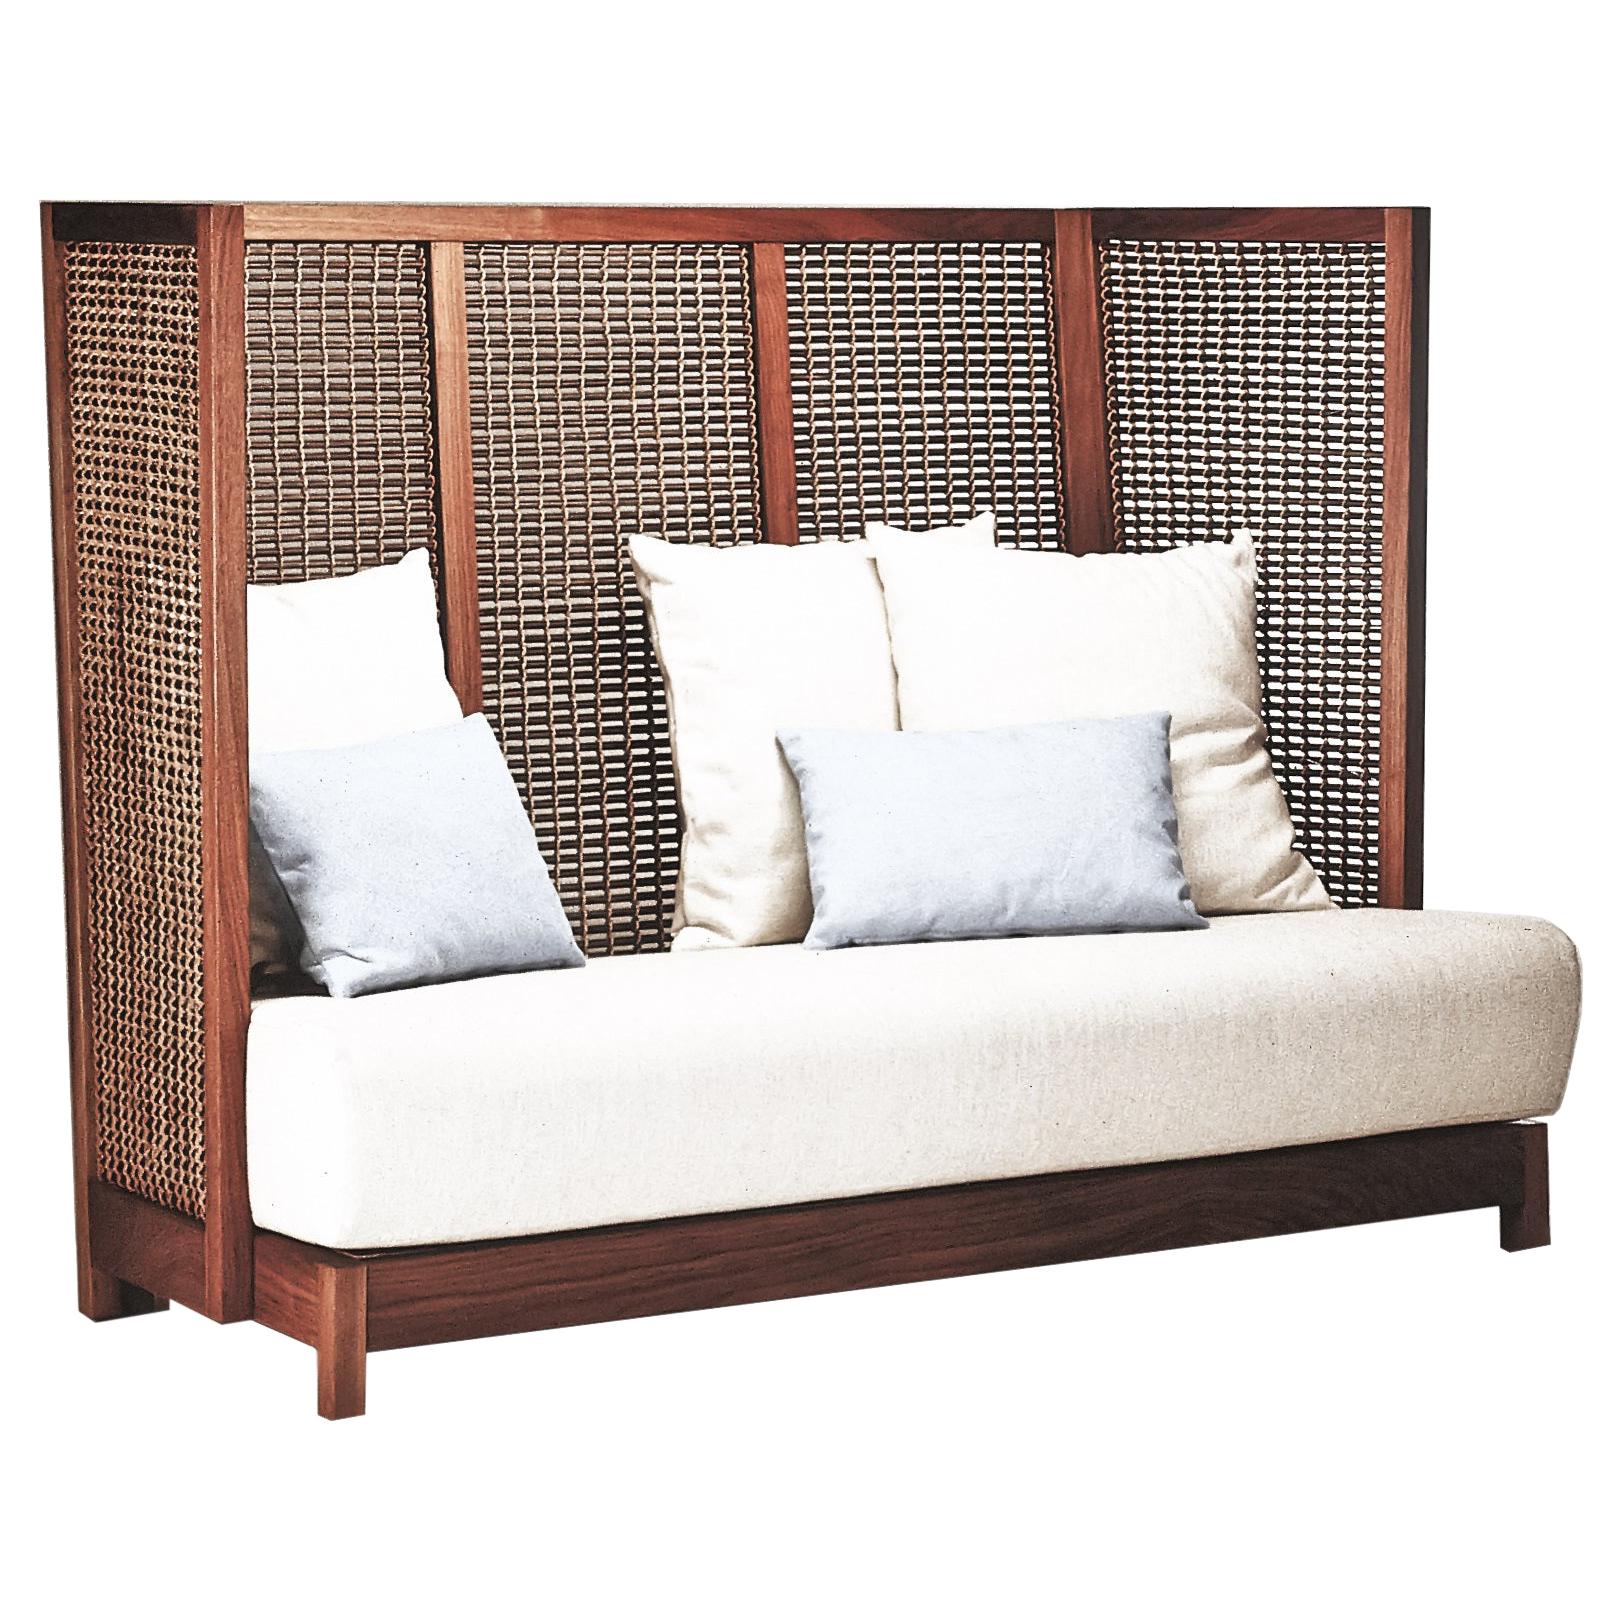 Maple Highback Suzy Wong Loveseat by Kenneth Cobonpue For Sale